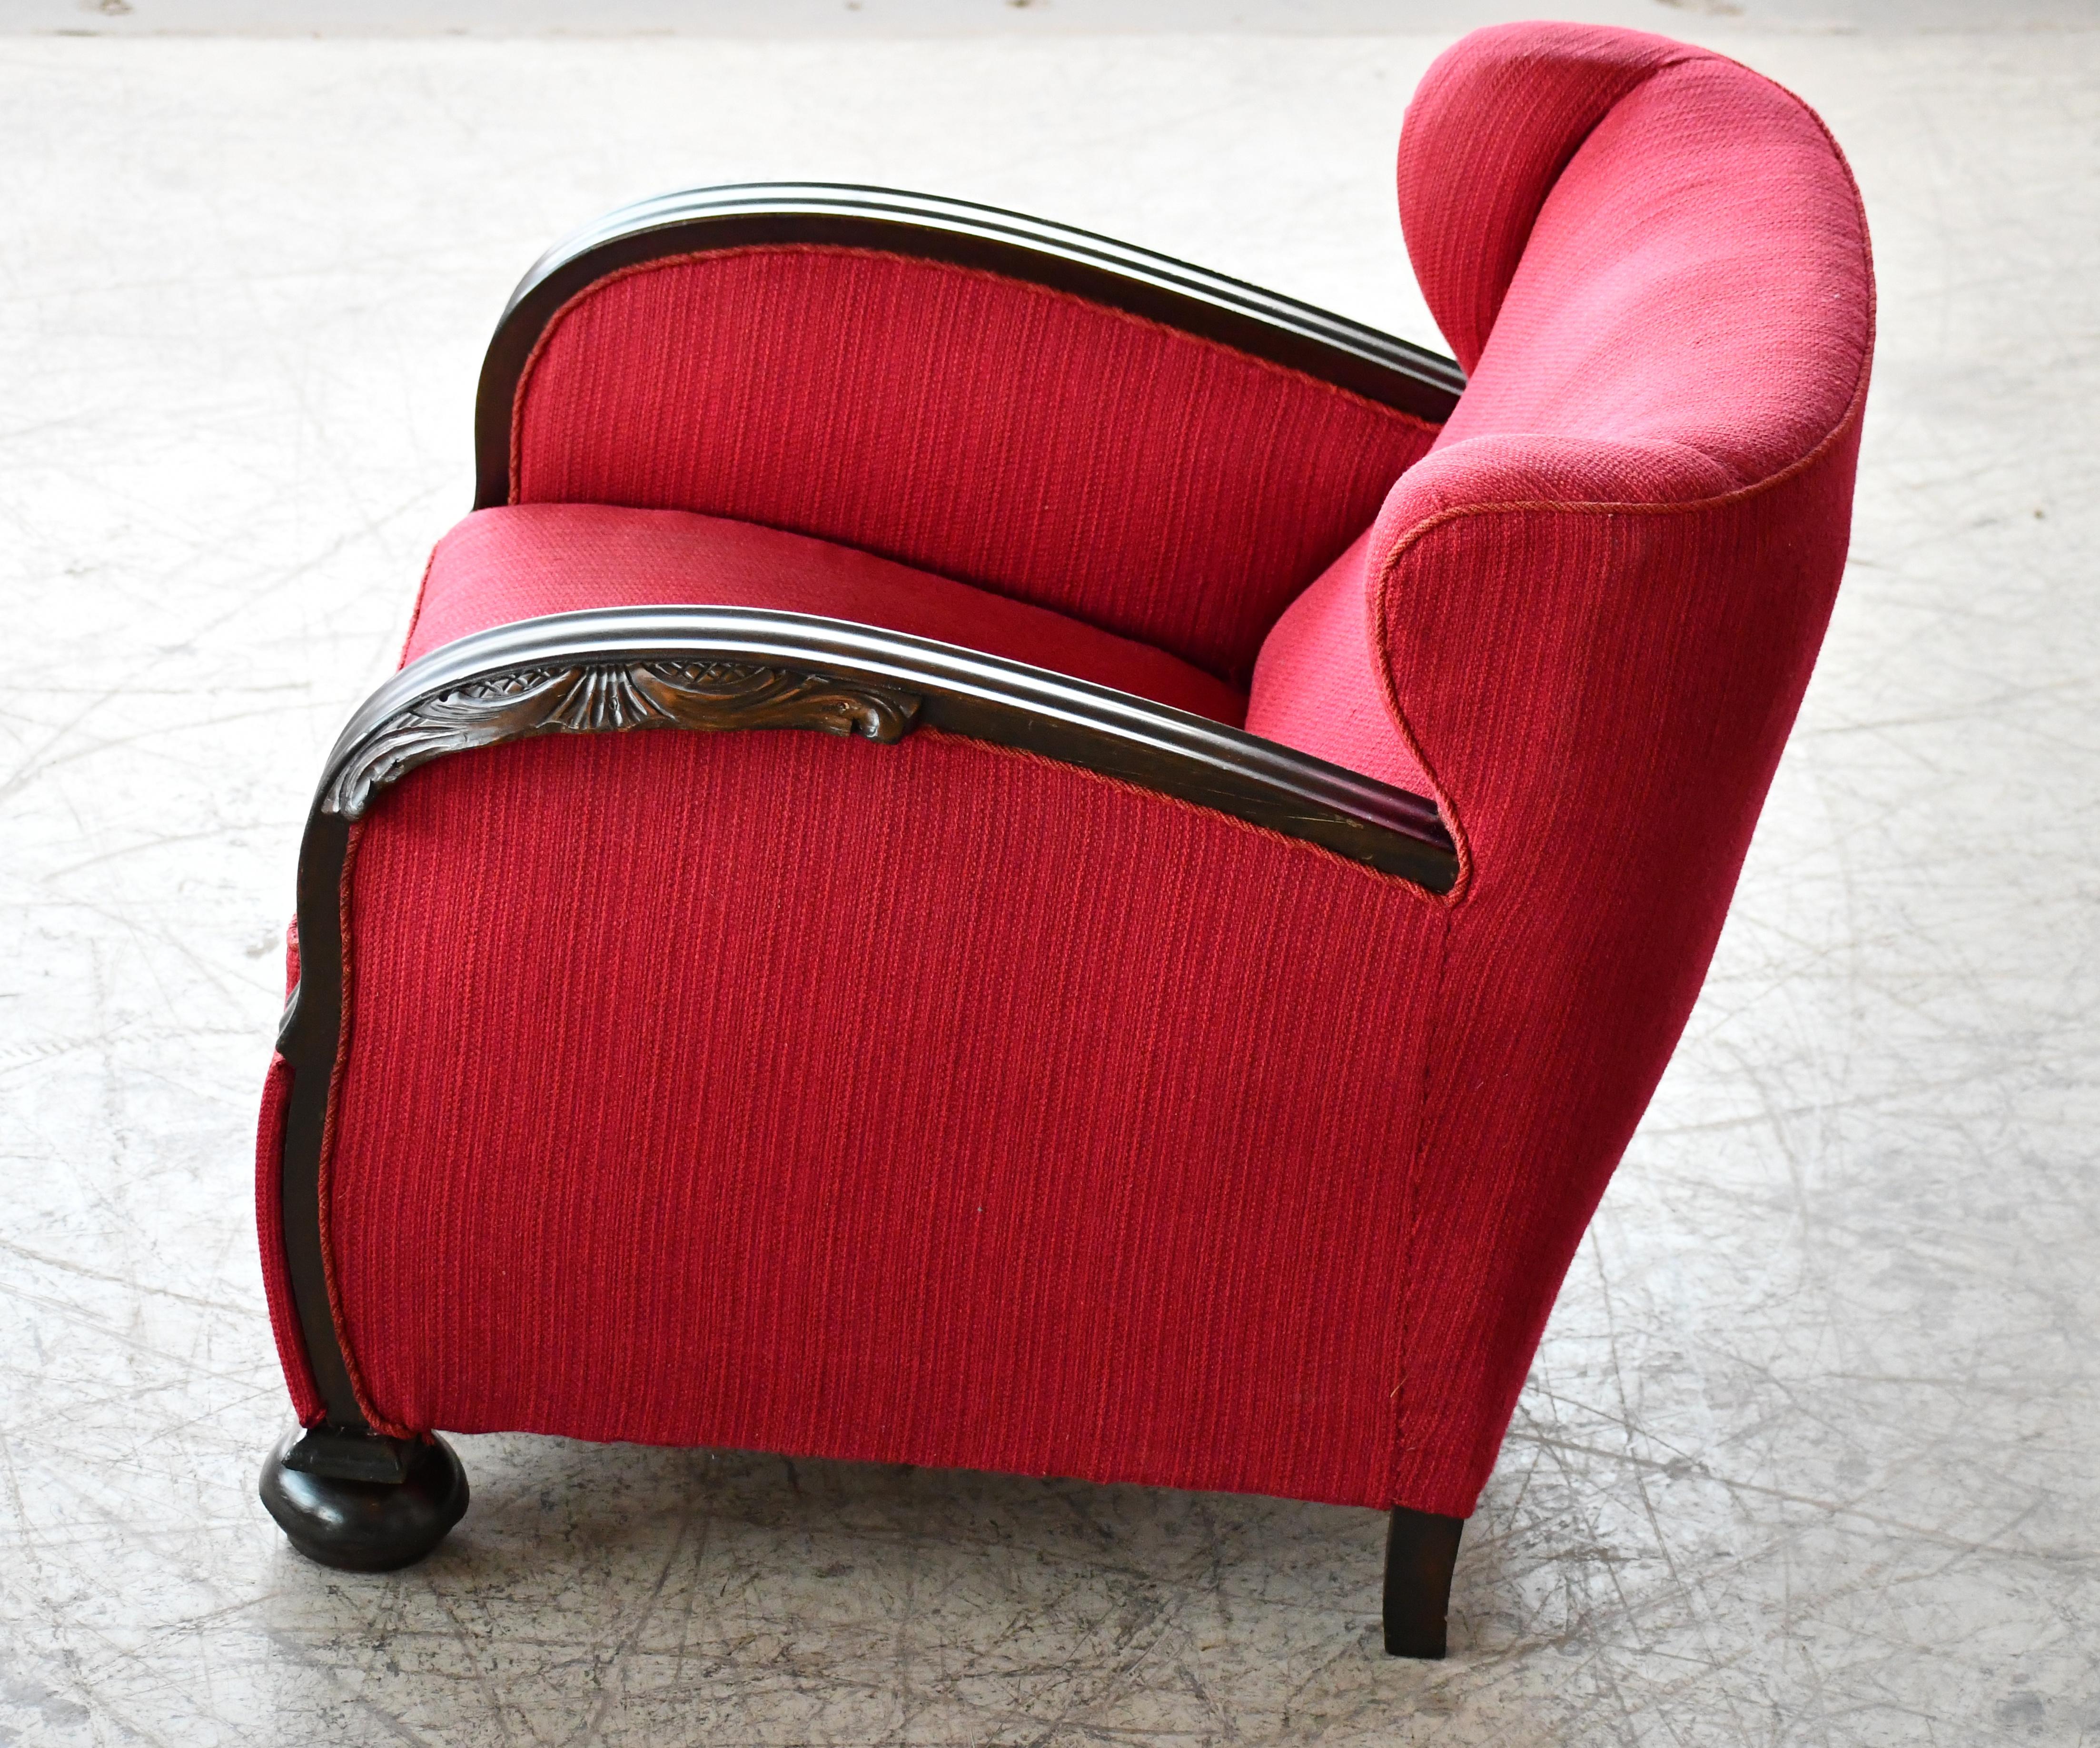 Danish 1930s Art Deco Lounge Chair in Red Mohair with Carved Armrests For Sale 4